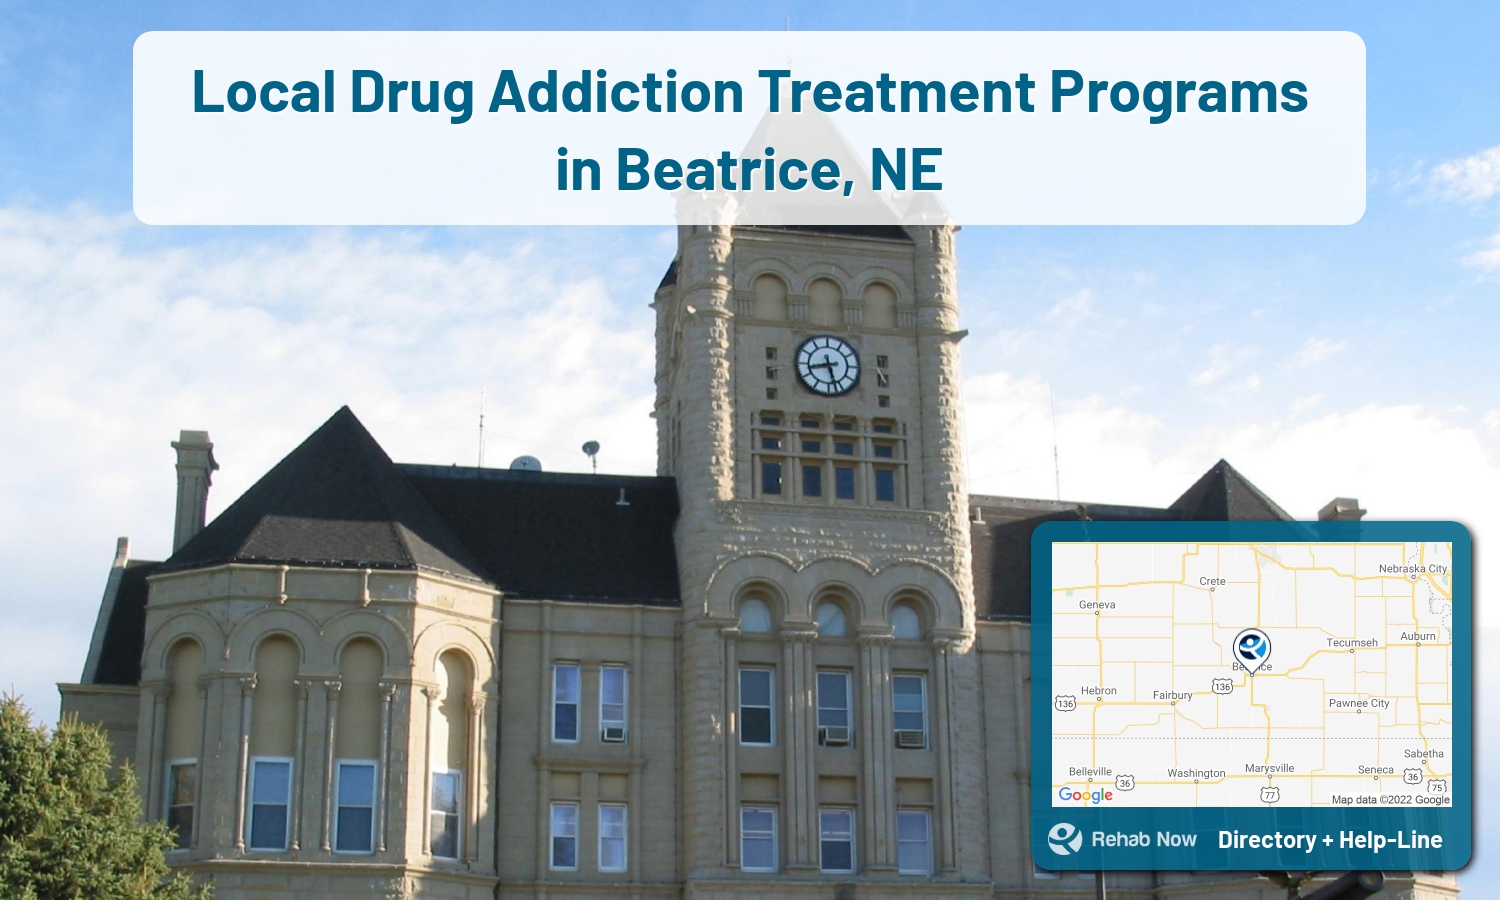 View options, availability, treatment methods, and more, for drug rehab and alcohol treatment in Alfred, Maine